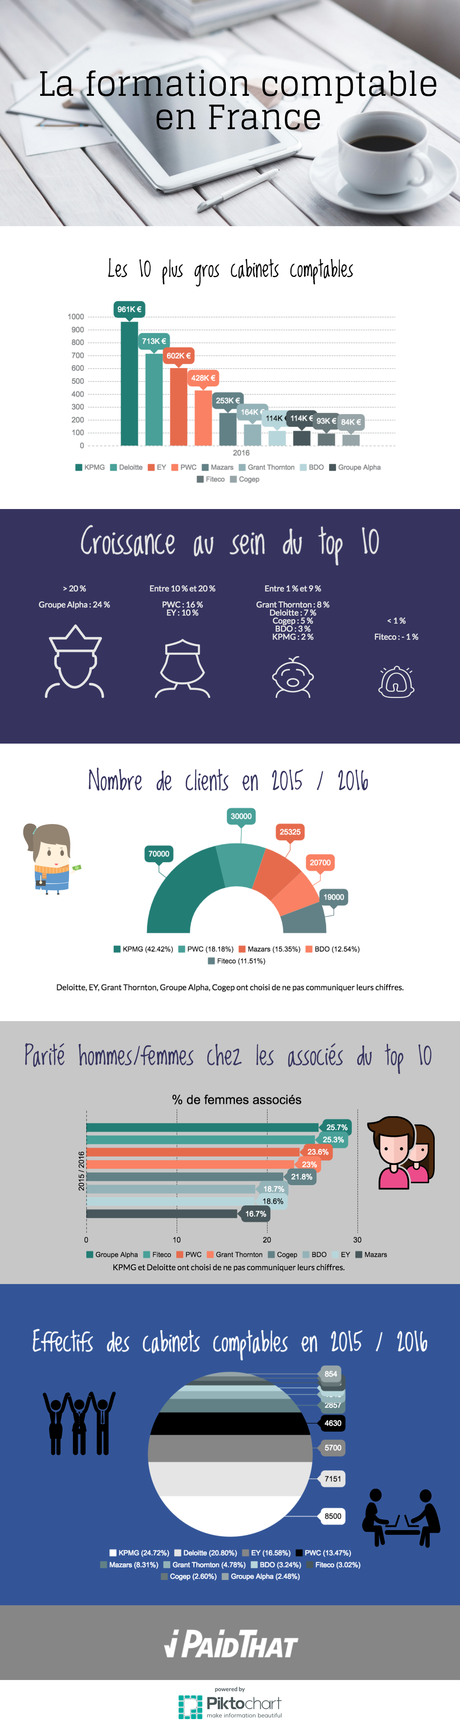 infographie formation comptable